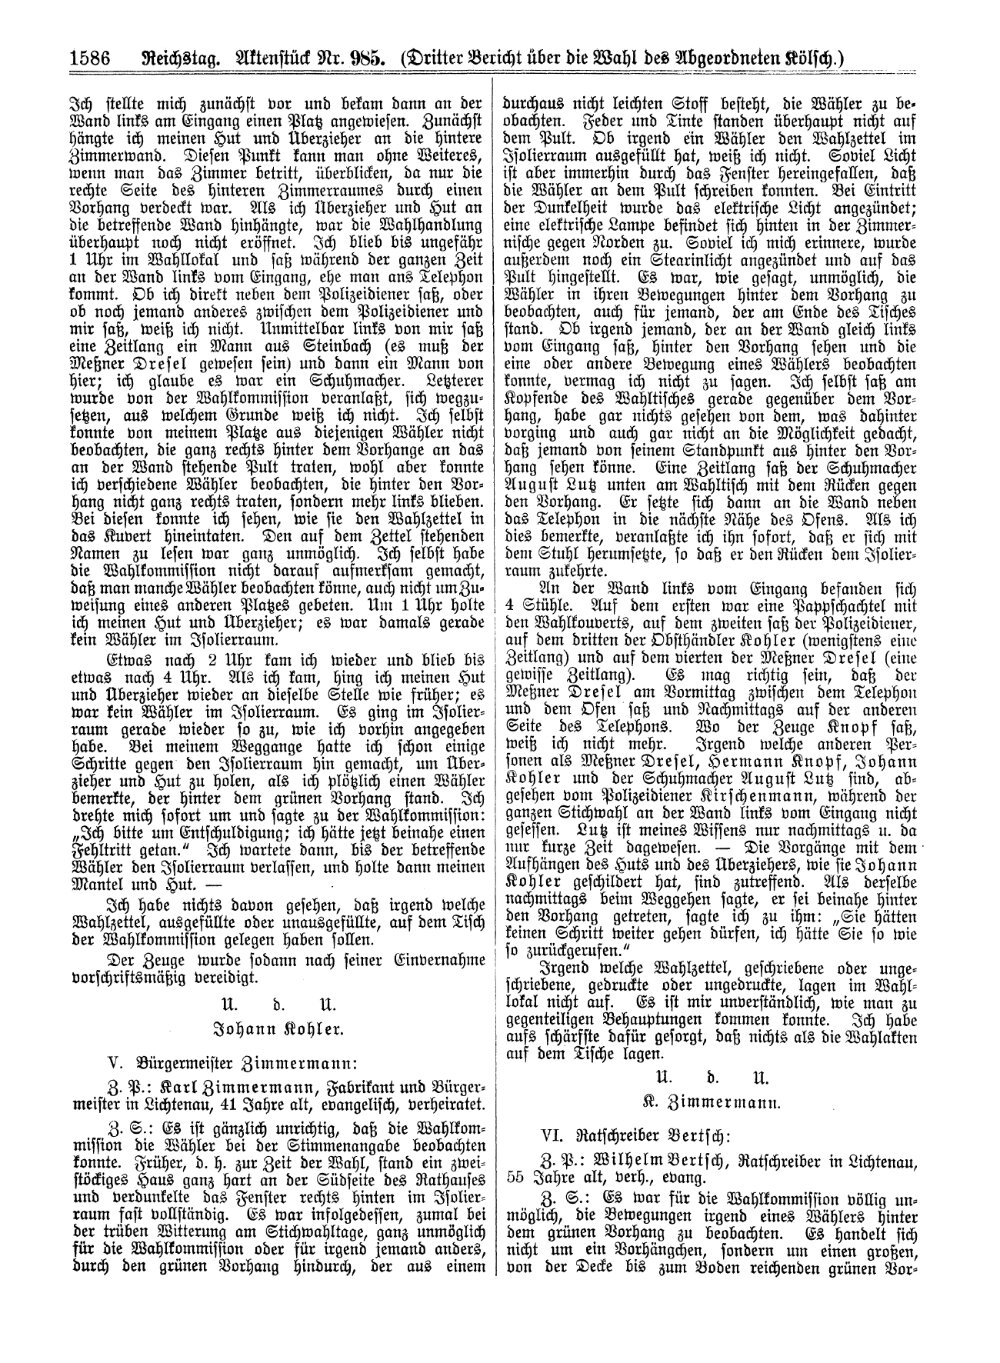 Scan of page 1586